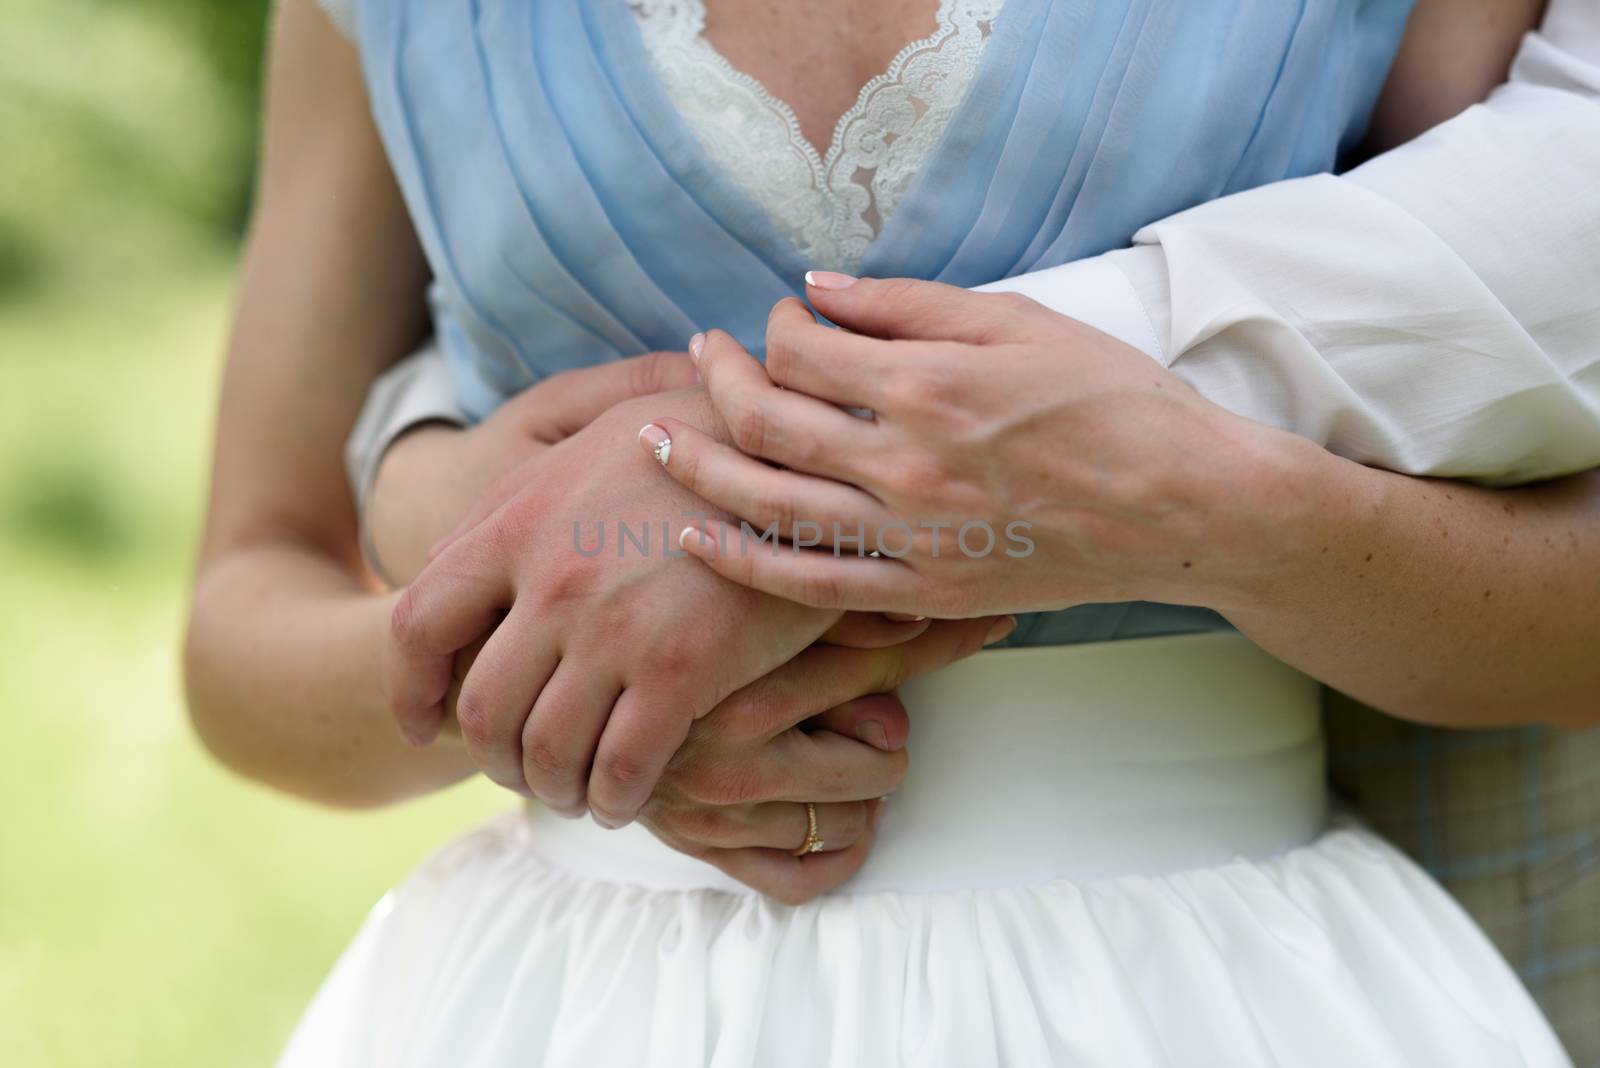 the hands of the bride and groom by Andreua